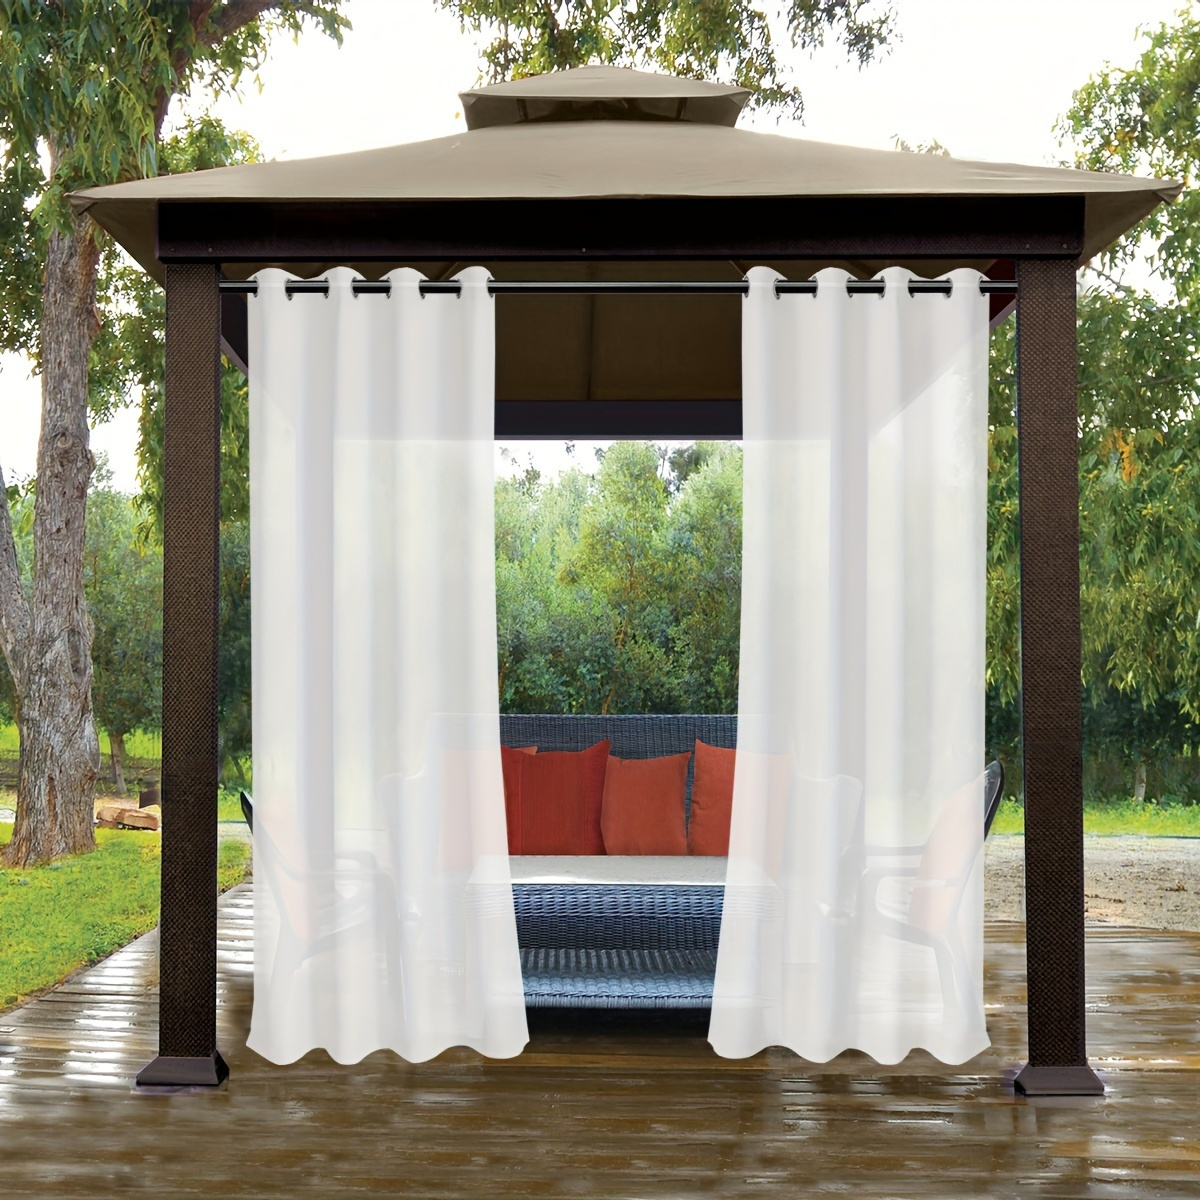 

1 Panel Waterproof Outdoor Curtains For Patio Privacy Screen Sun Blocking Grommet Curtain Weatherproof Uv Resistant Curtains For Gazebo Front Porch Pergola